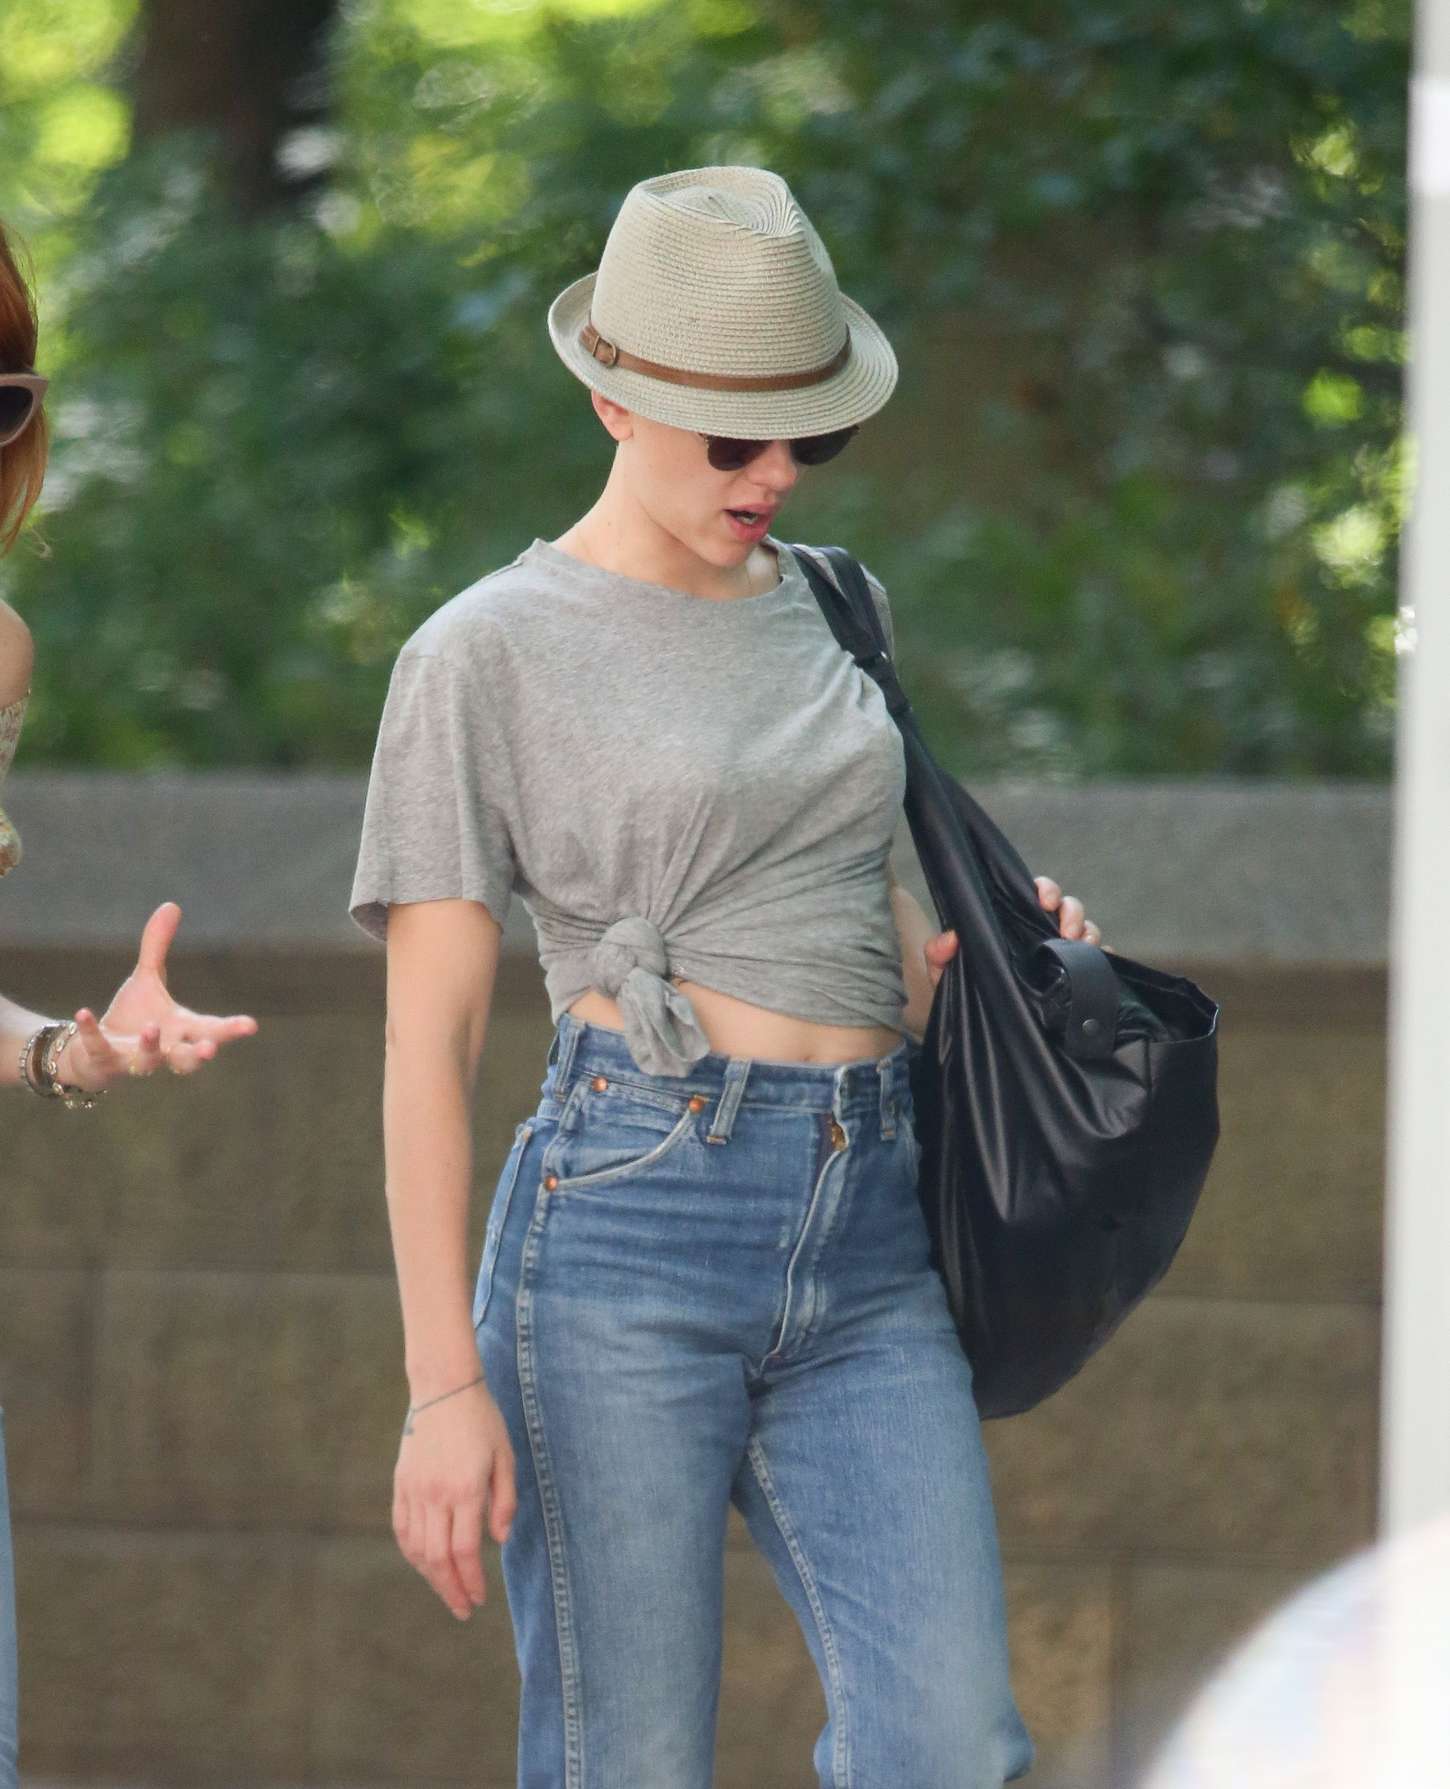 “Channeling Scarlett: How to Rock Chic Street Style with Denim”